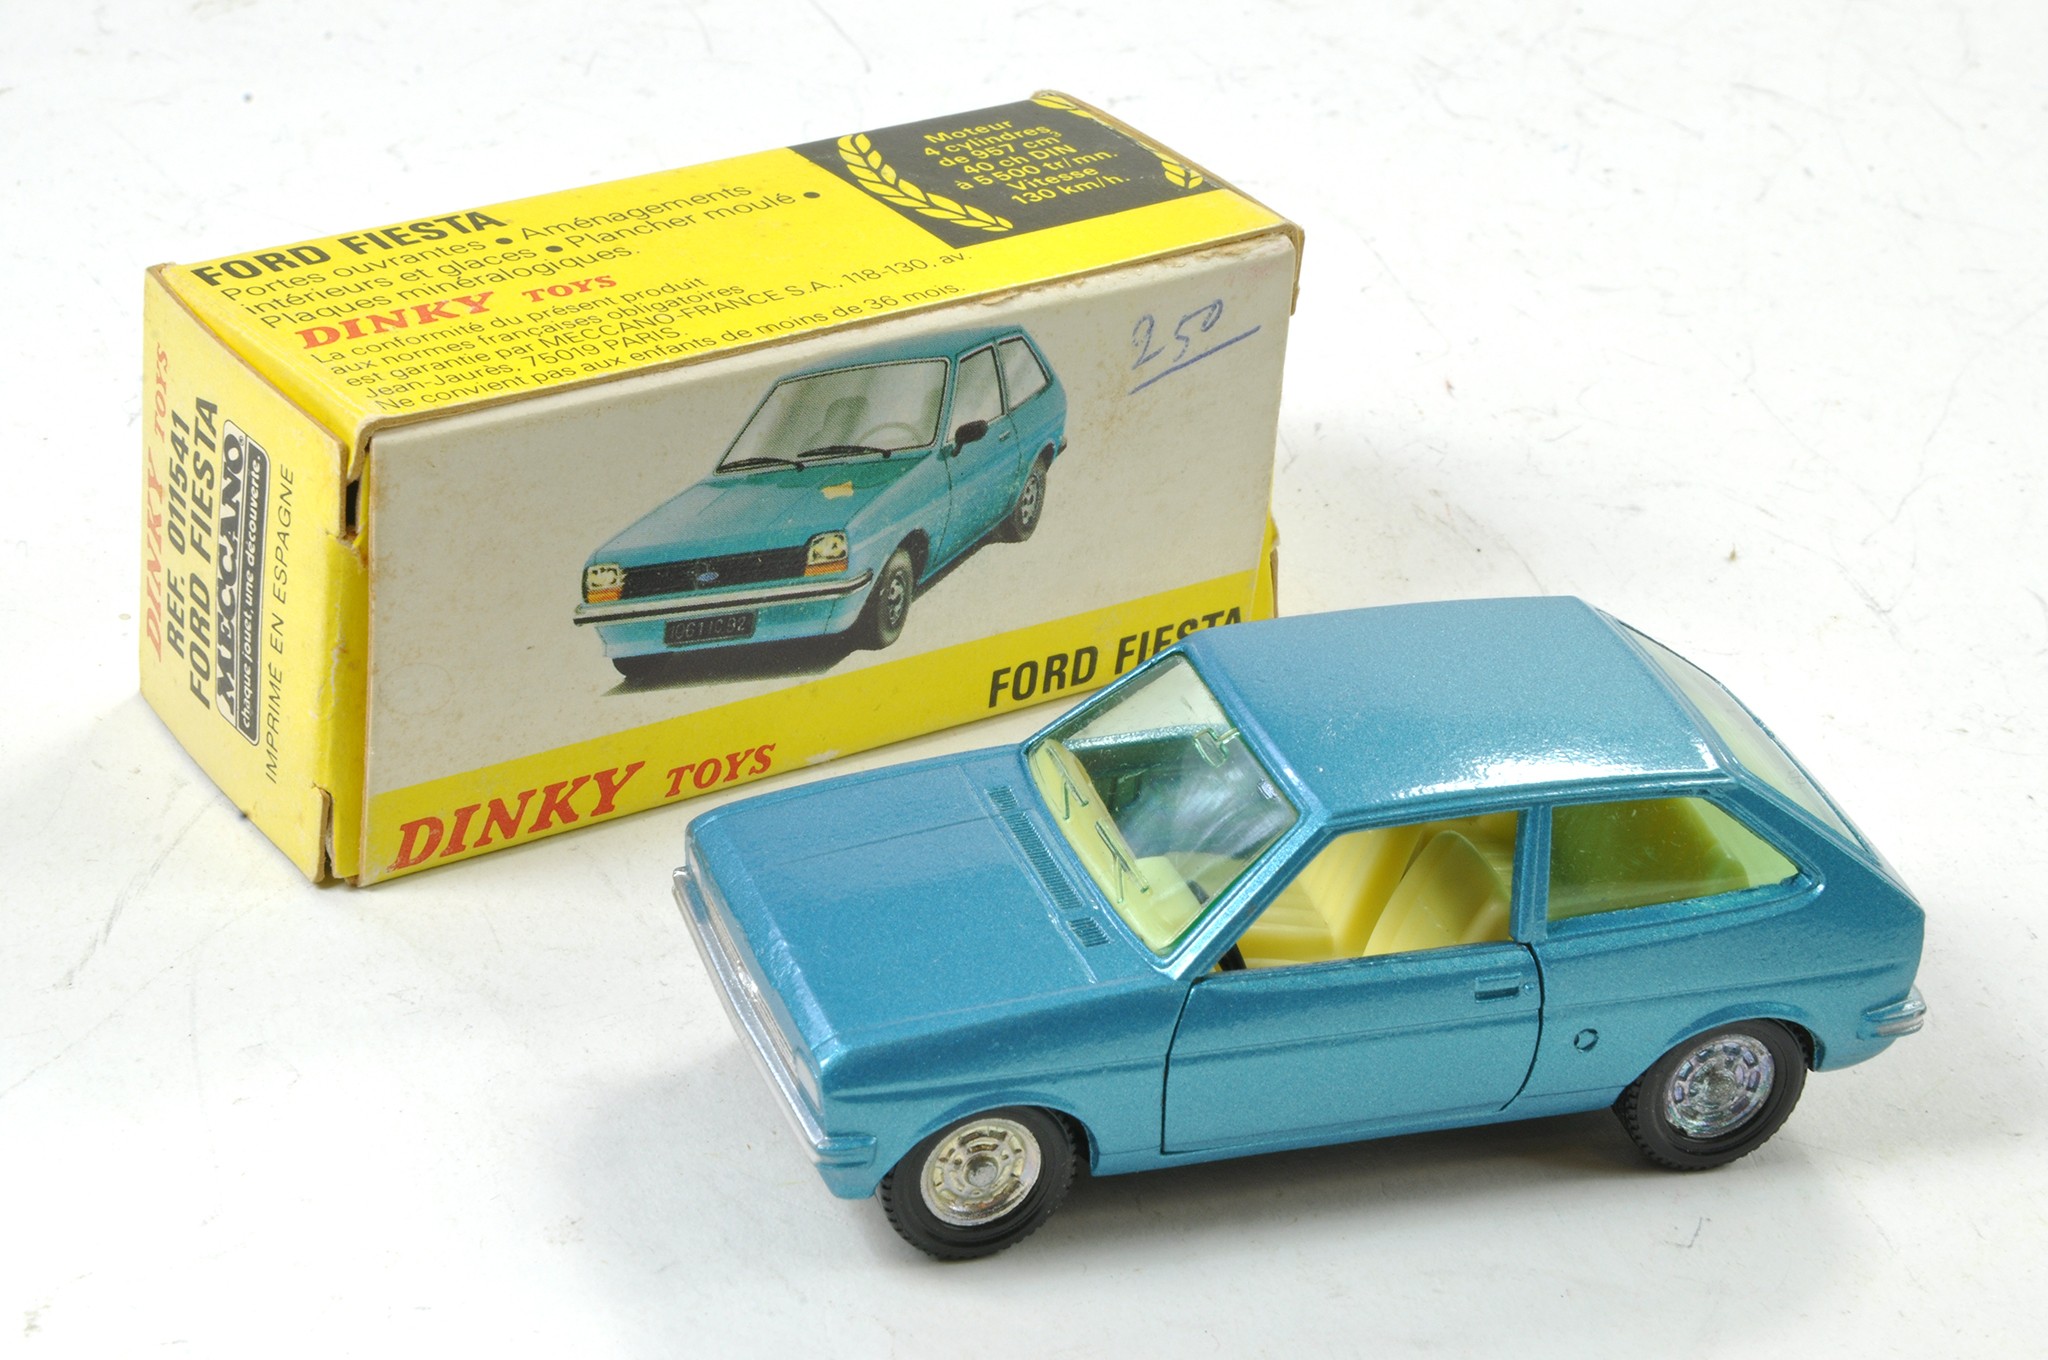 Dinky No. 011541 Ford Fiesta. Made in Spain. Metallic blue with white interior. Generally Excellent,